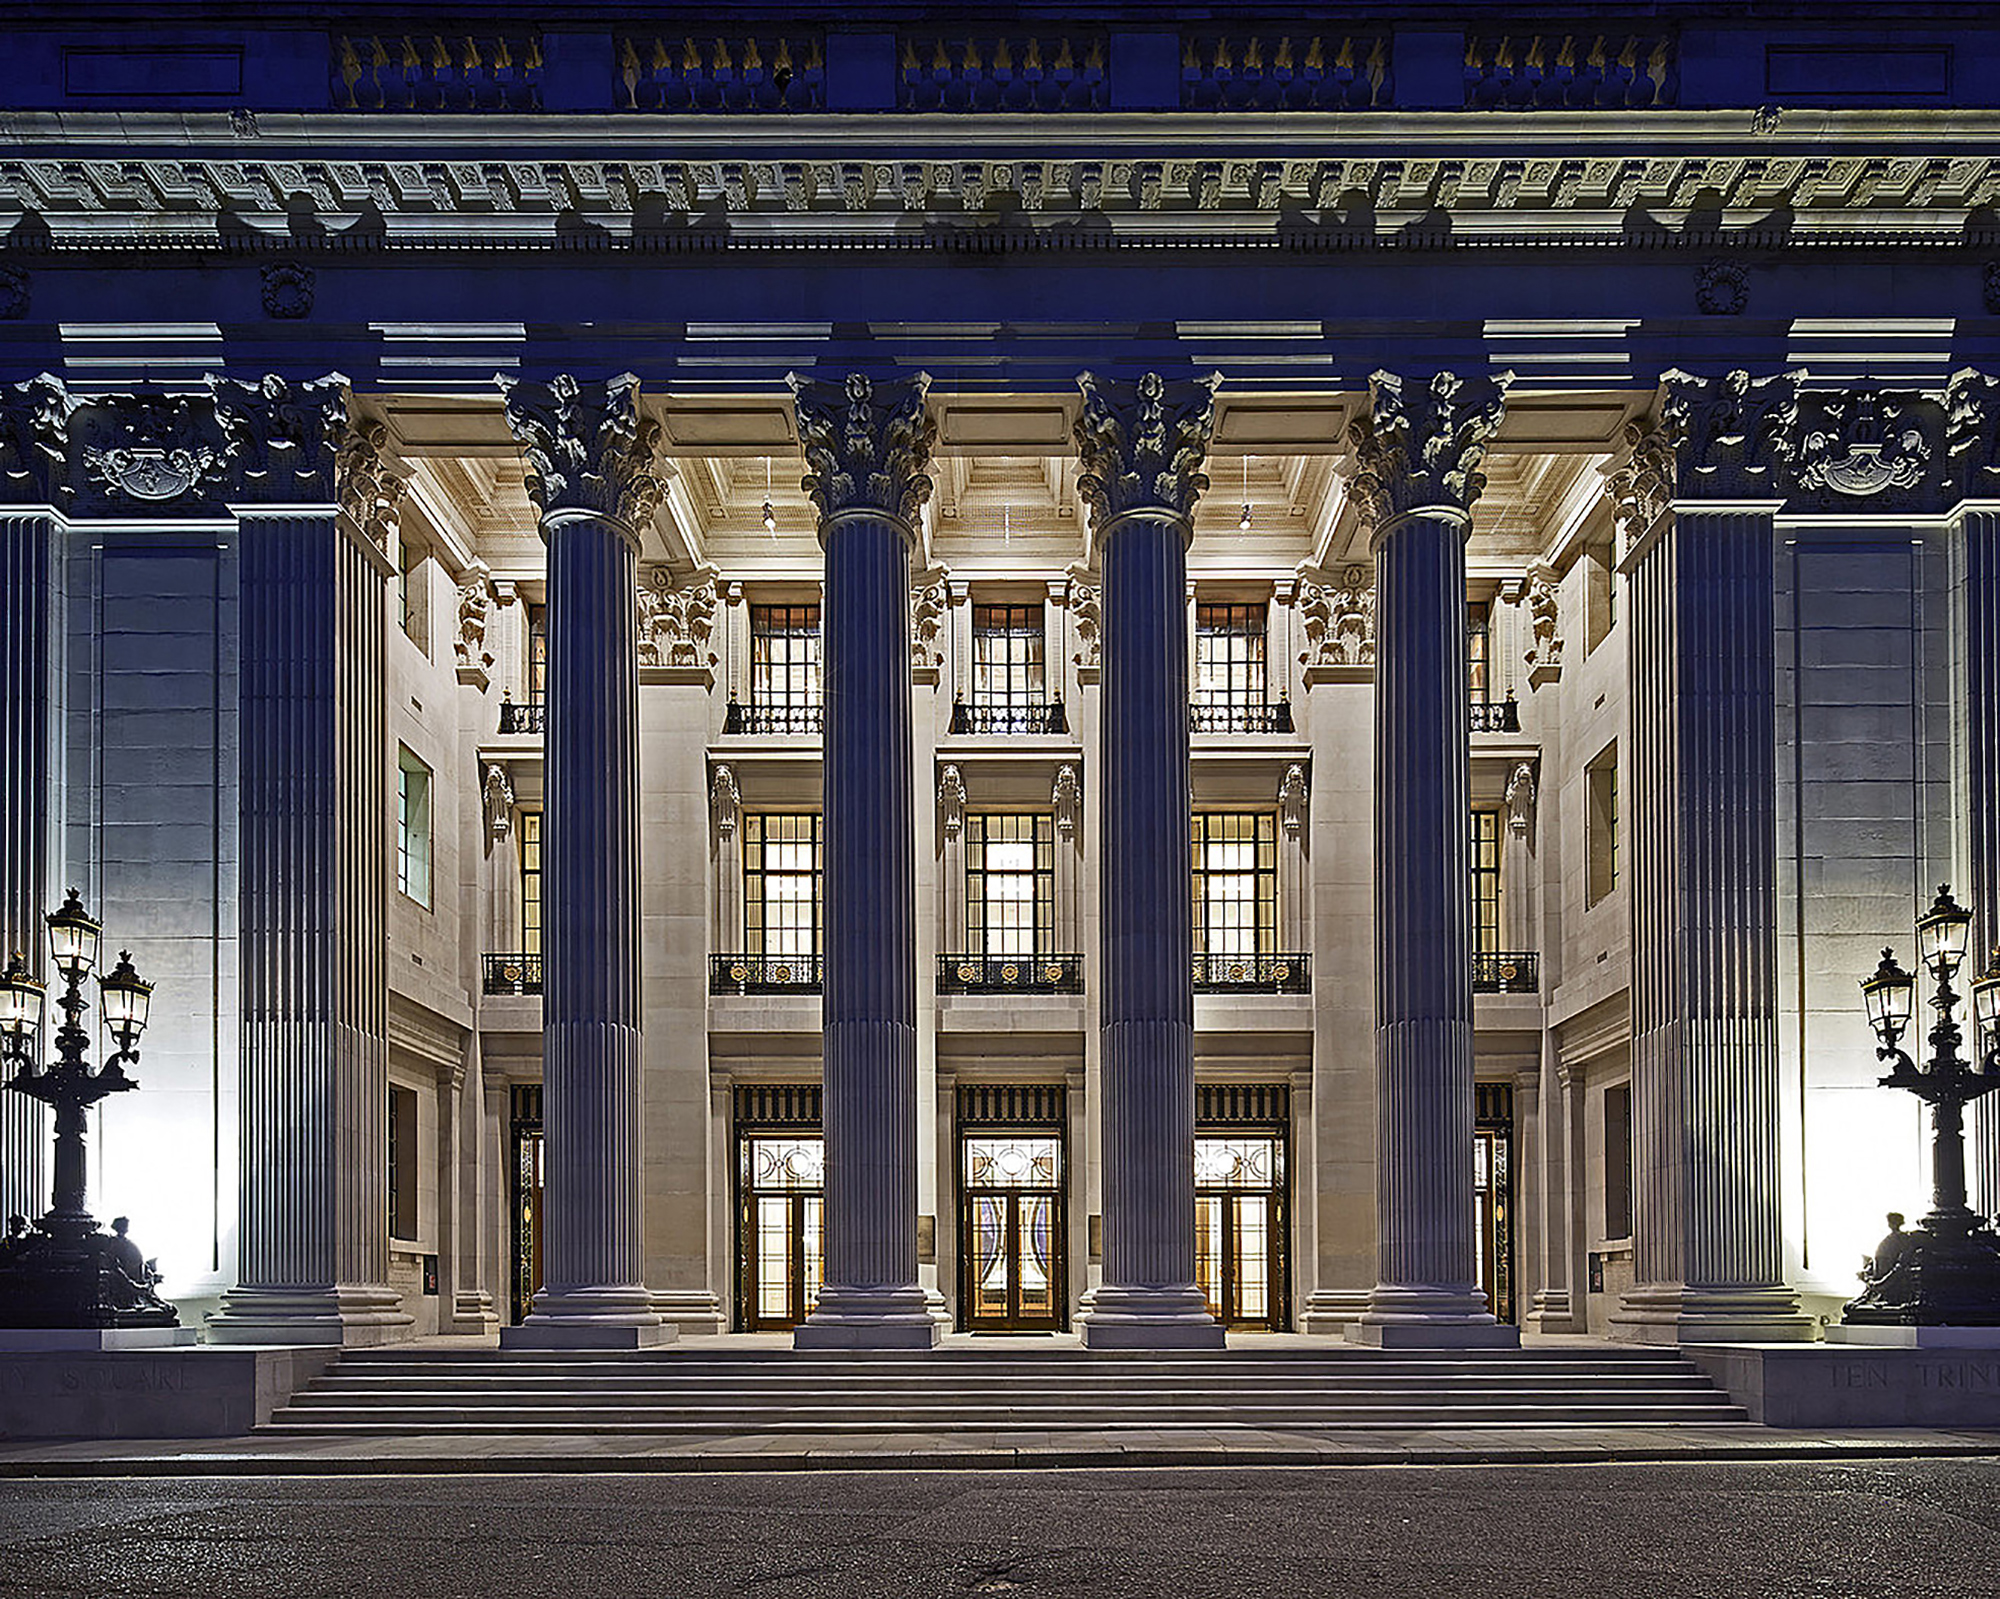 The columned exterior of Ten Trinity Square